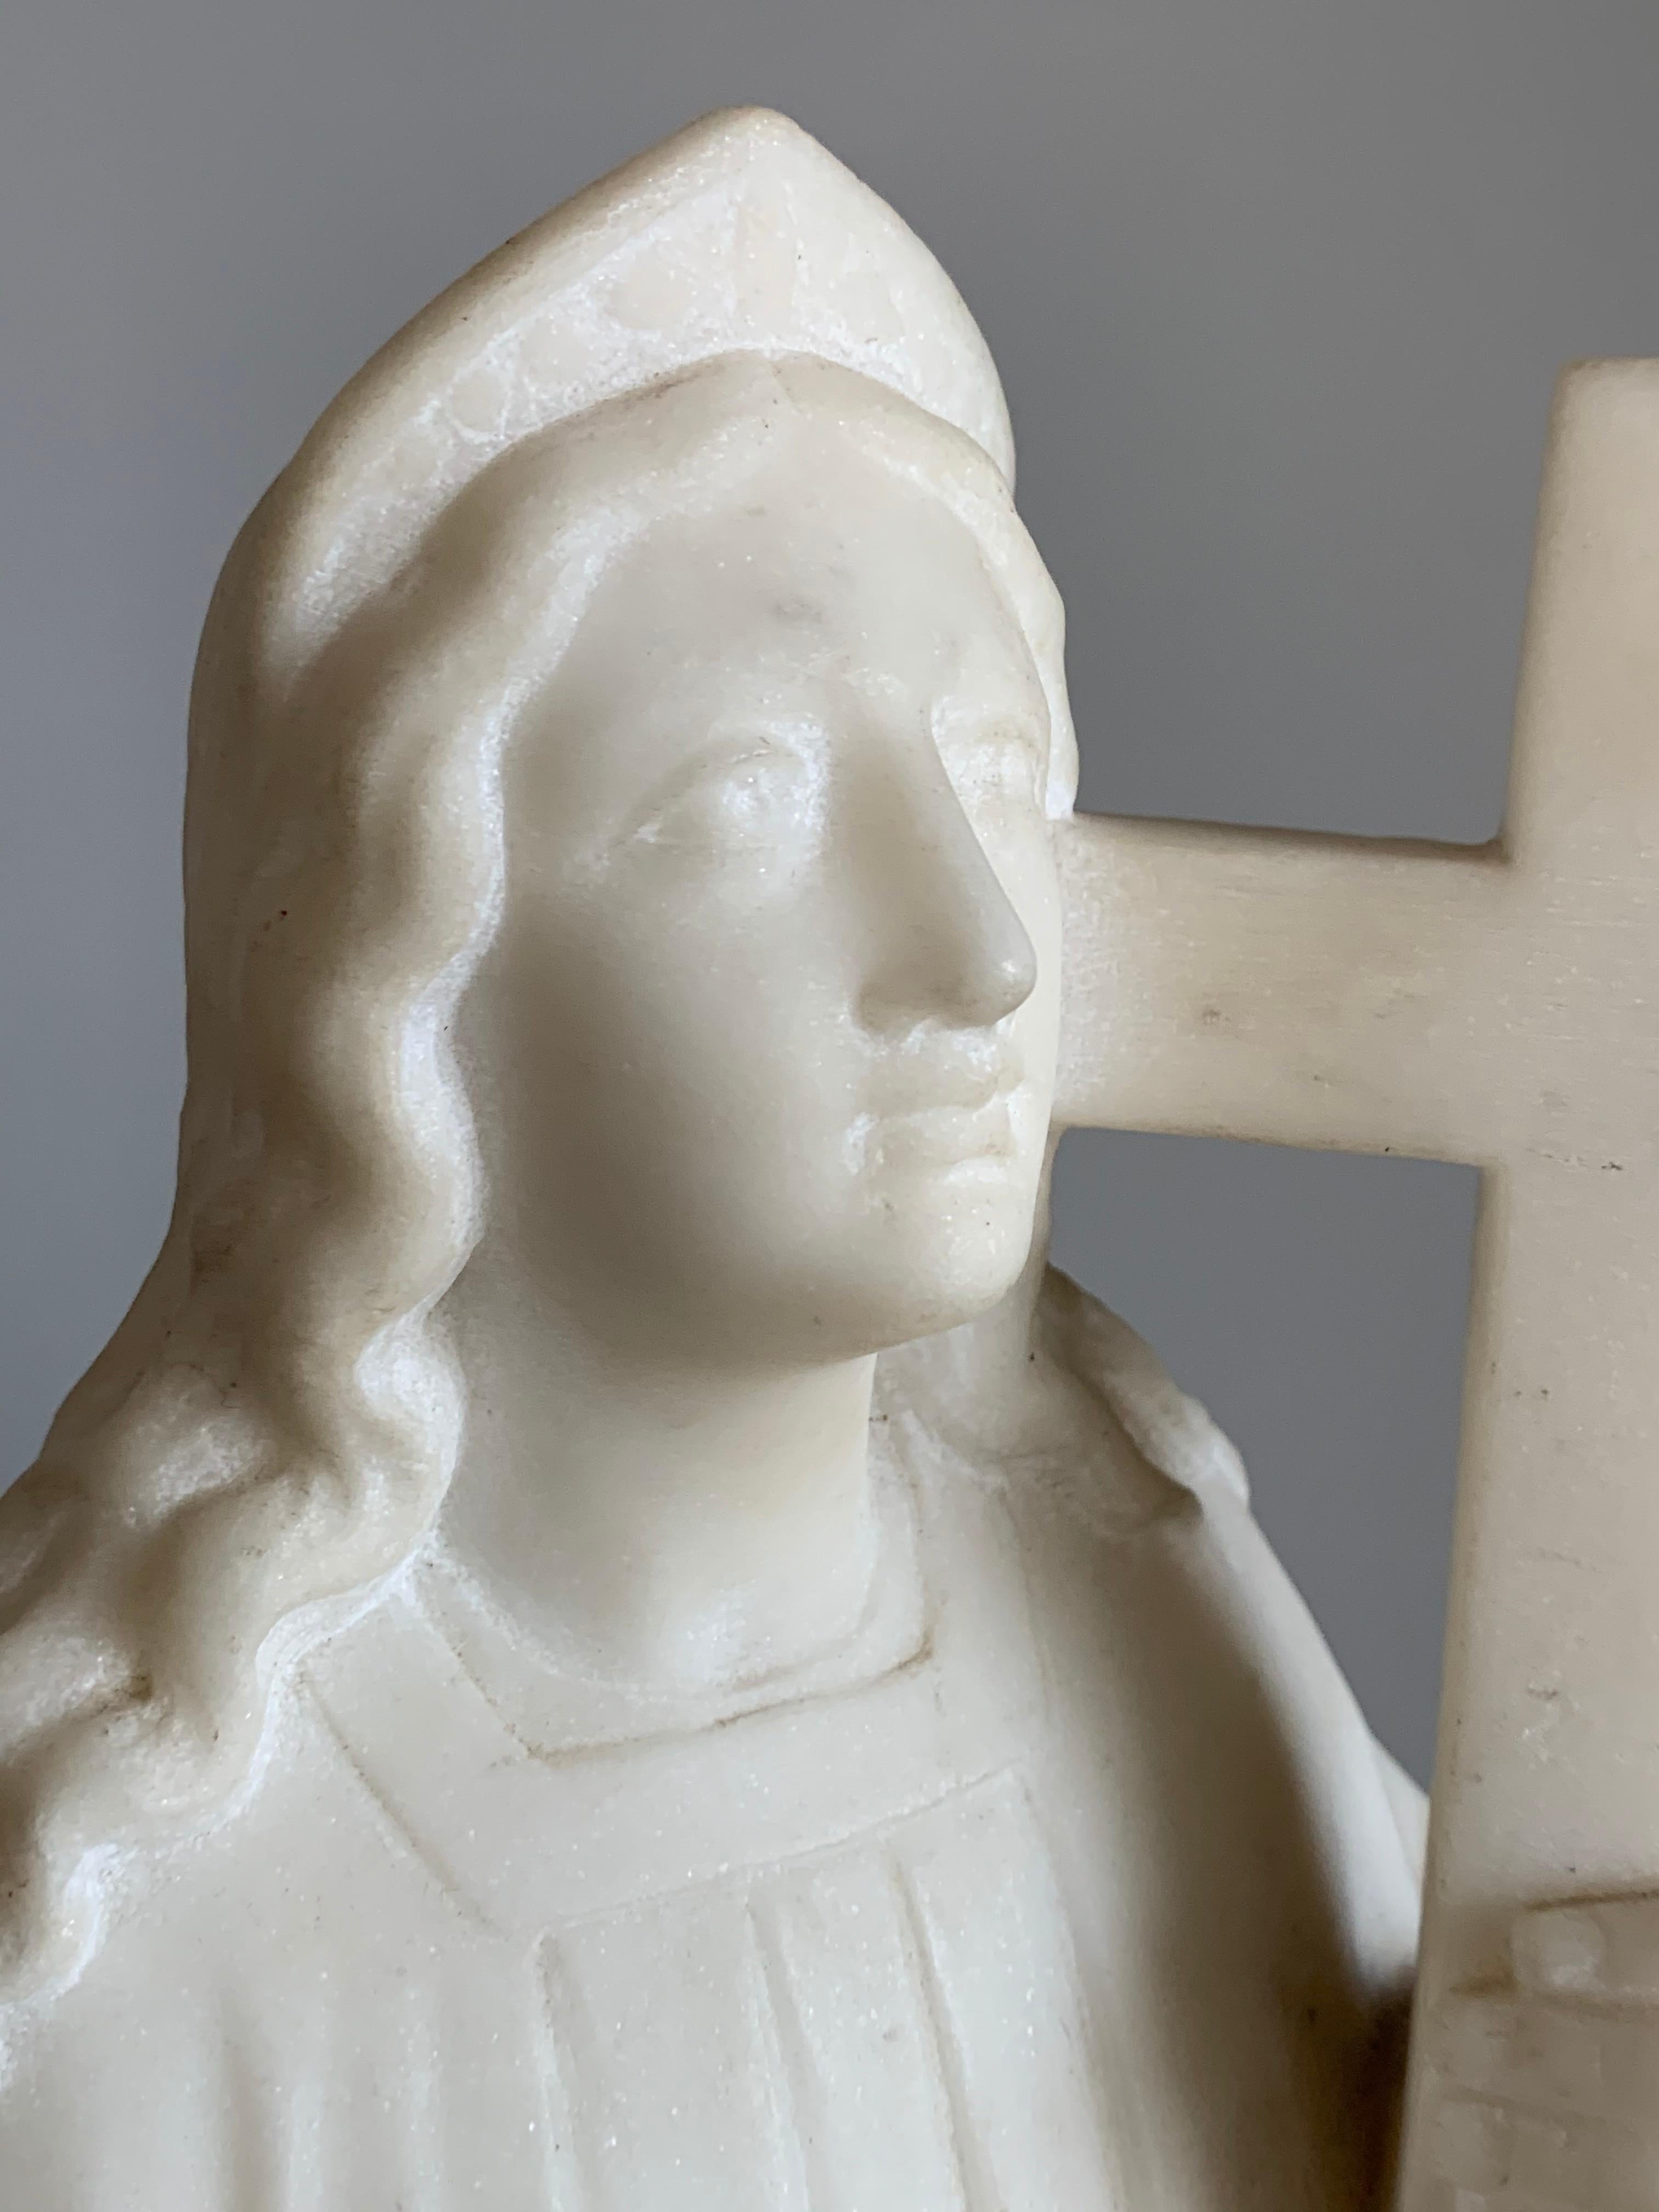 Beautiful antique and all handcrafted, solid Carrara marble sculpture.

This rare work of religious art is entirely hand carved out of white marble. We are not certain, but we feel that this striking sculpture depicts Mother Mary. Her kind and